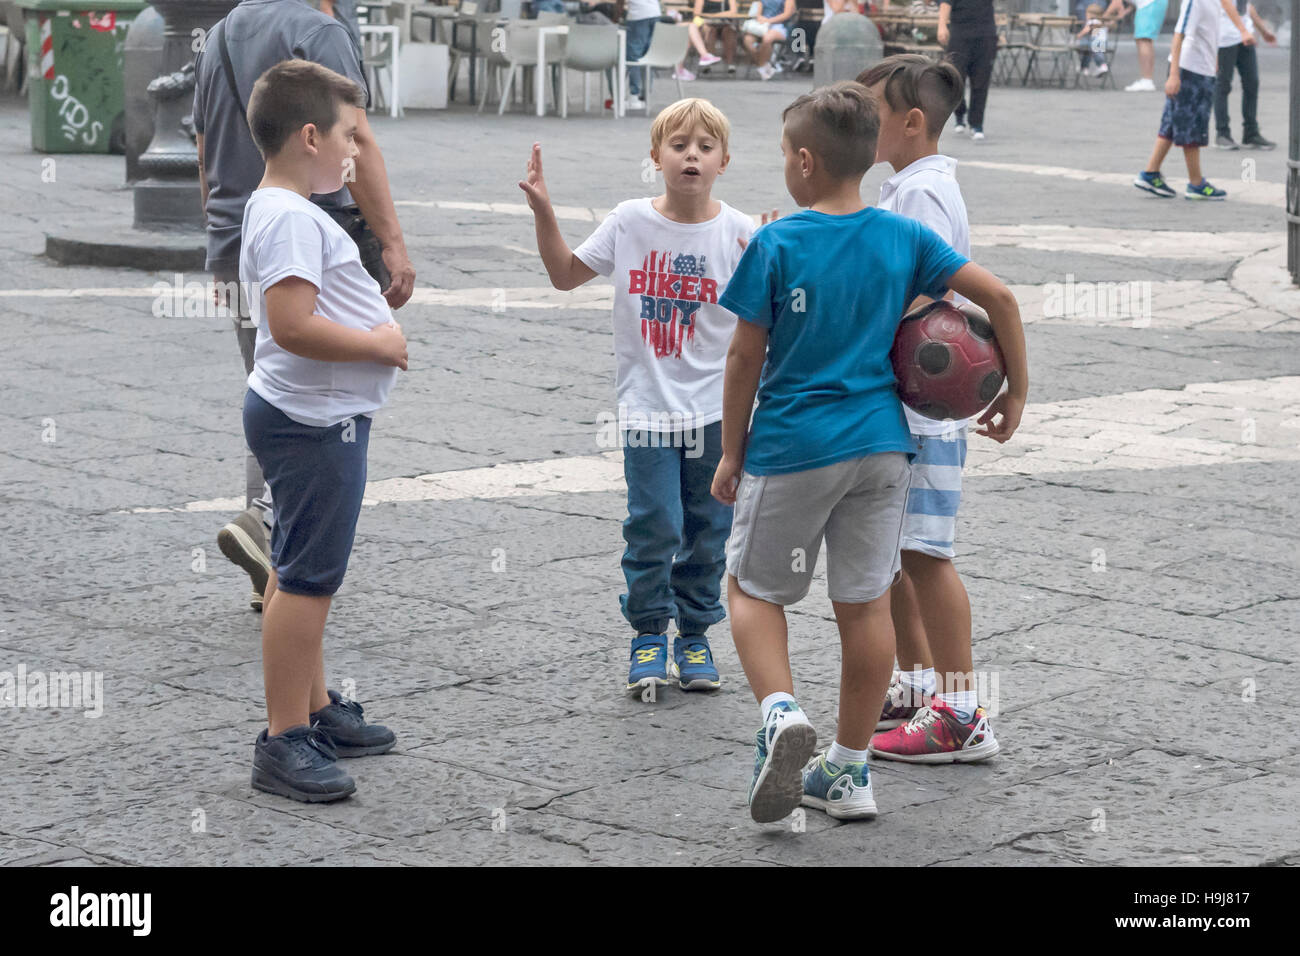 Team of young soccer players discuss match, of Naples, Naples; southern Ital Stock Photo